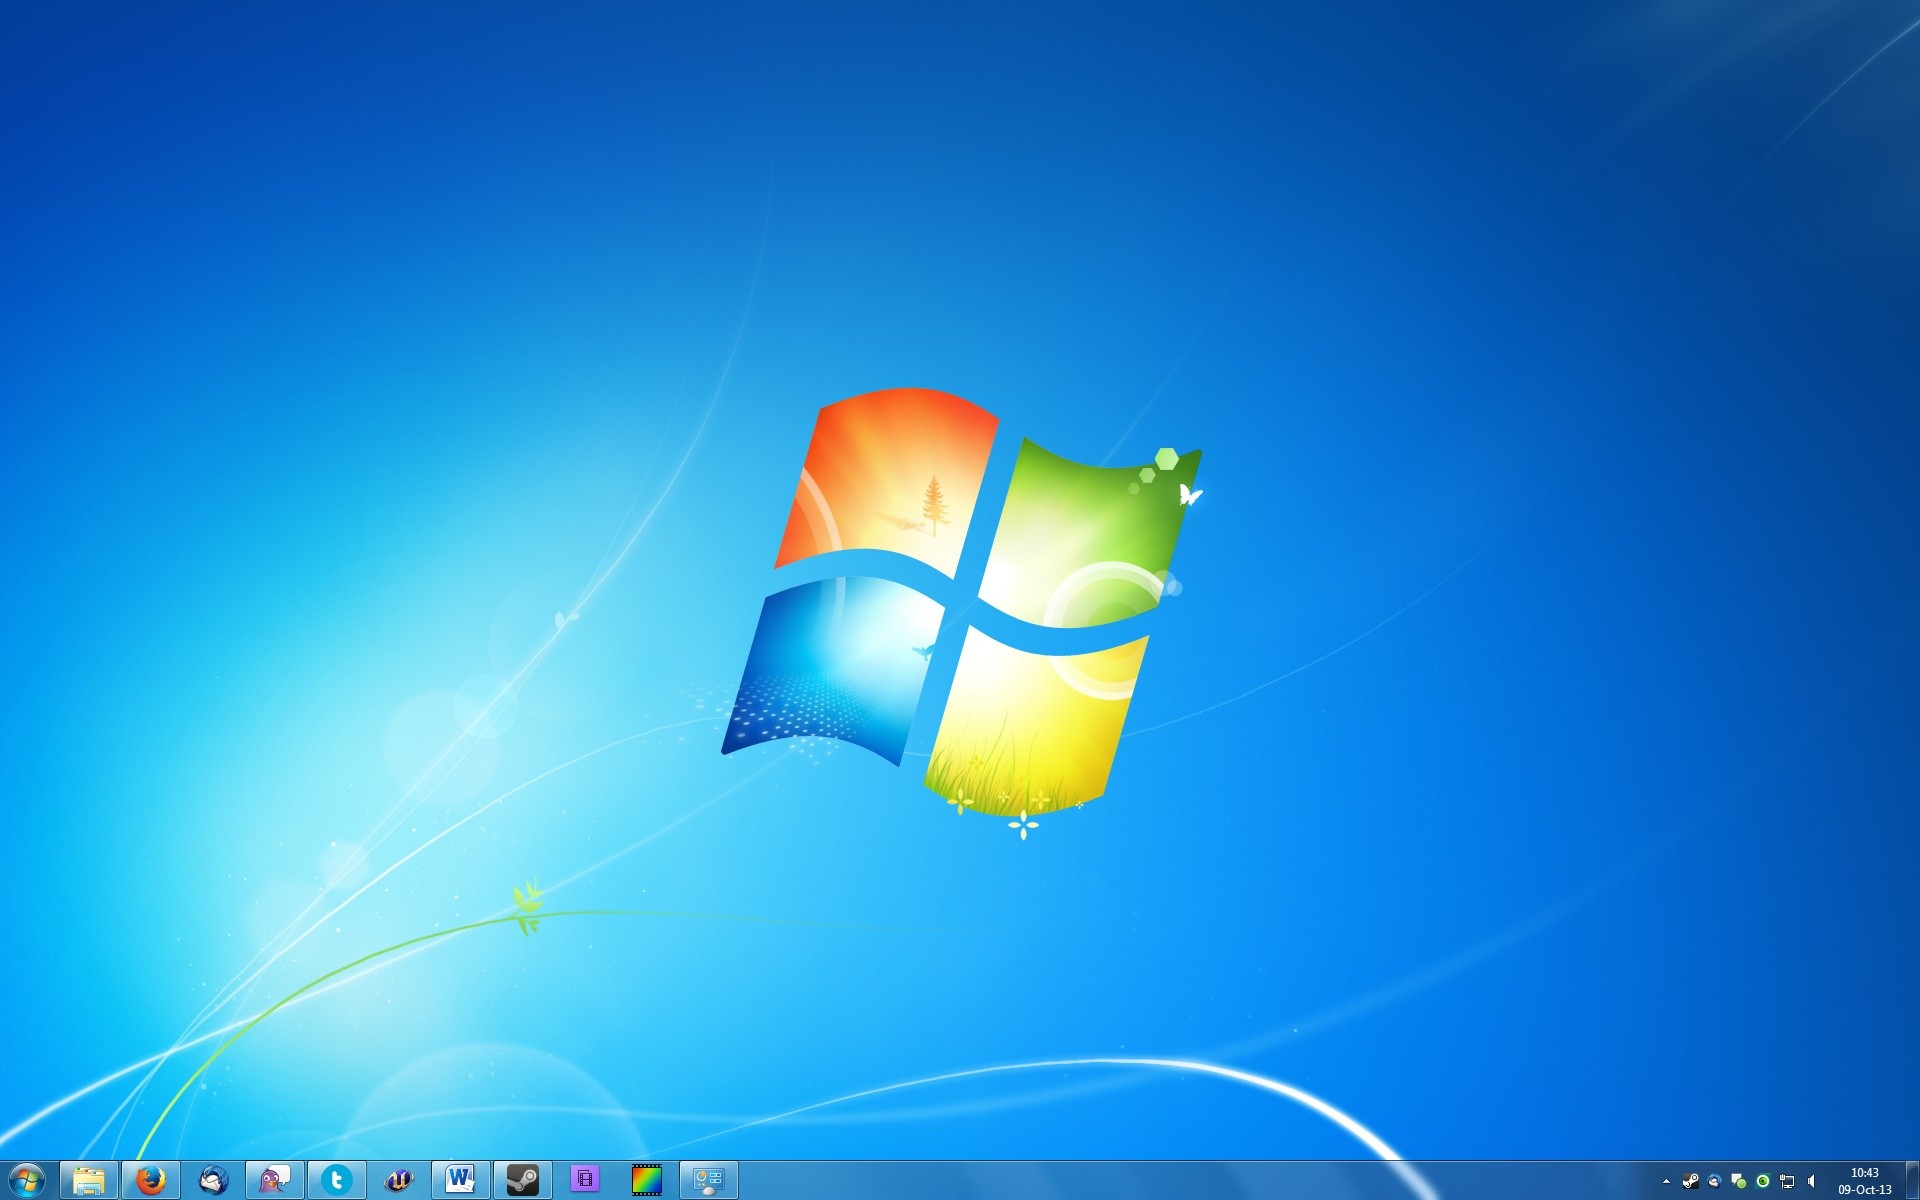 Why Windows 7 Is Still a Good Choice for Home Users